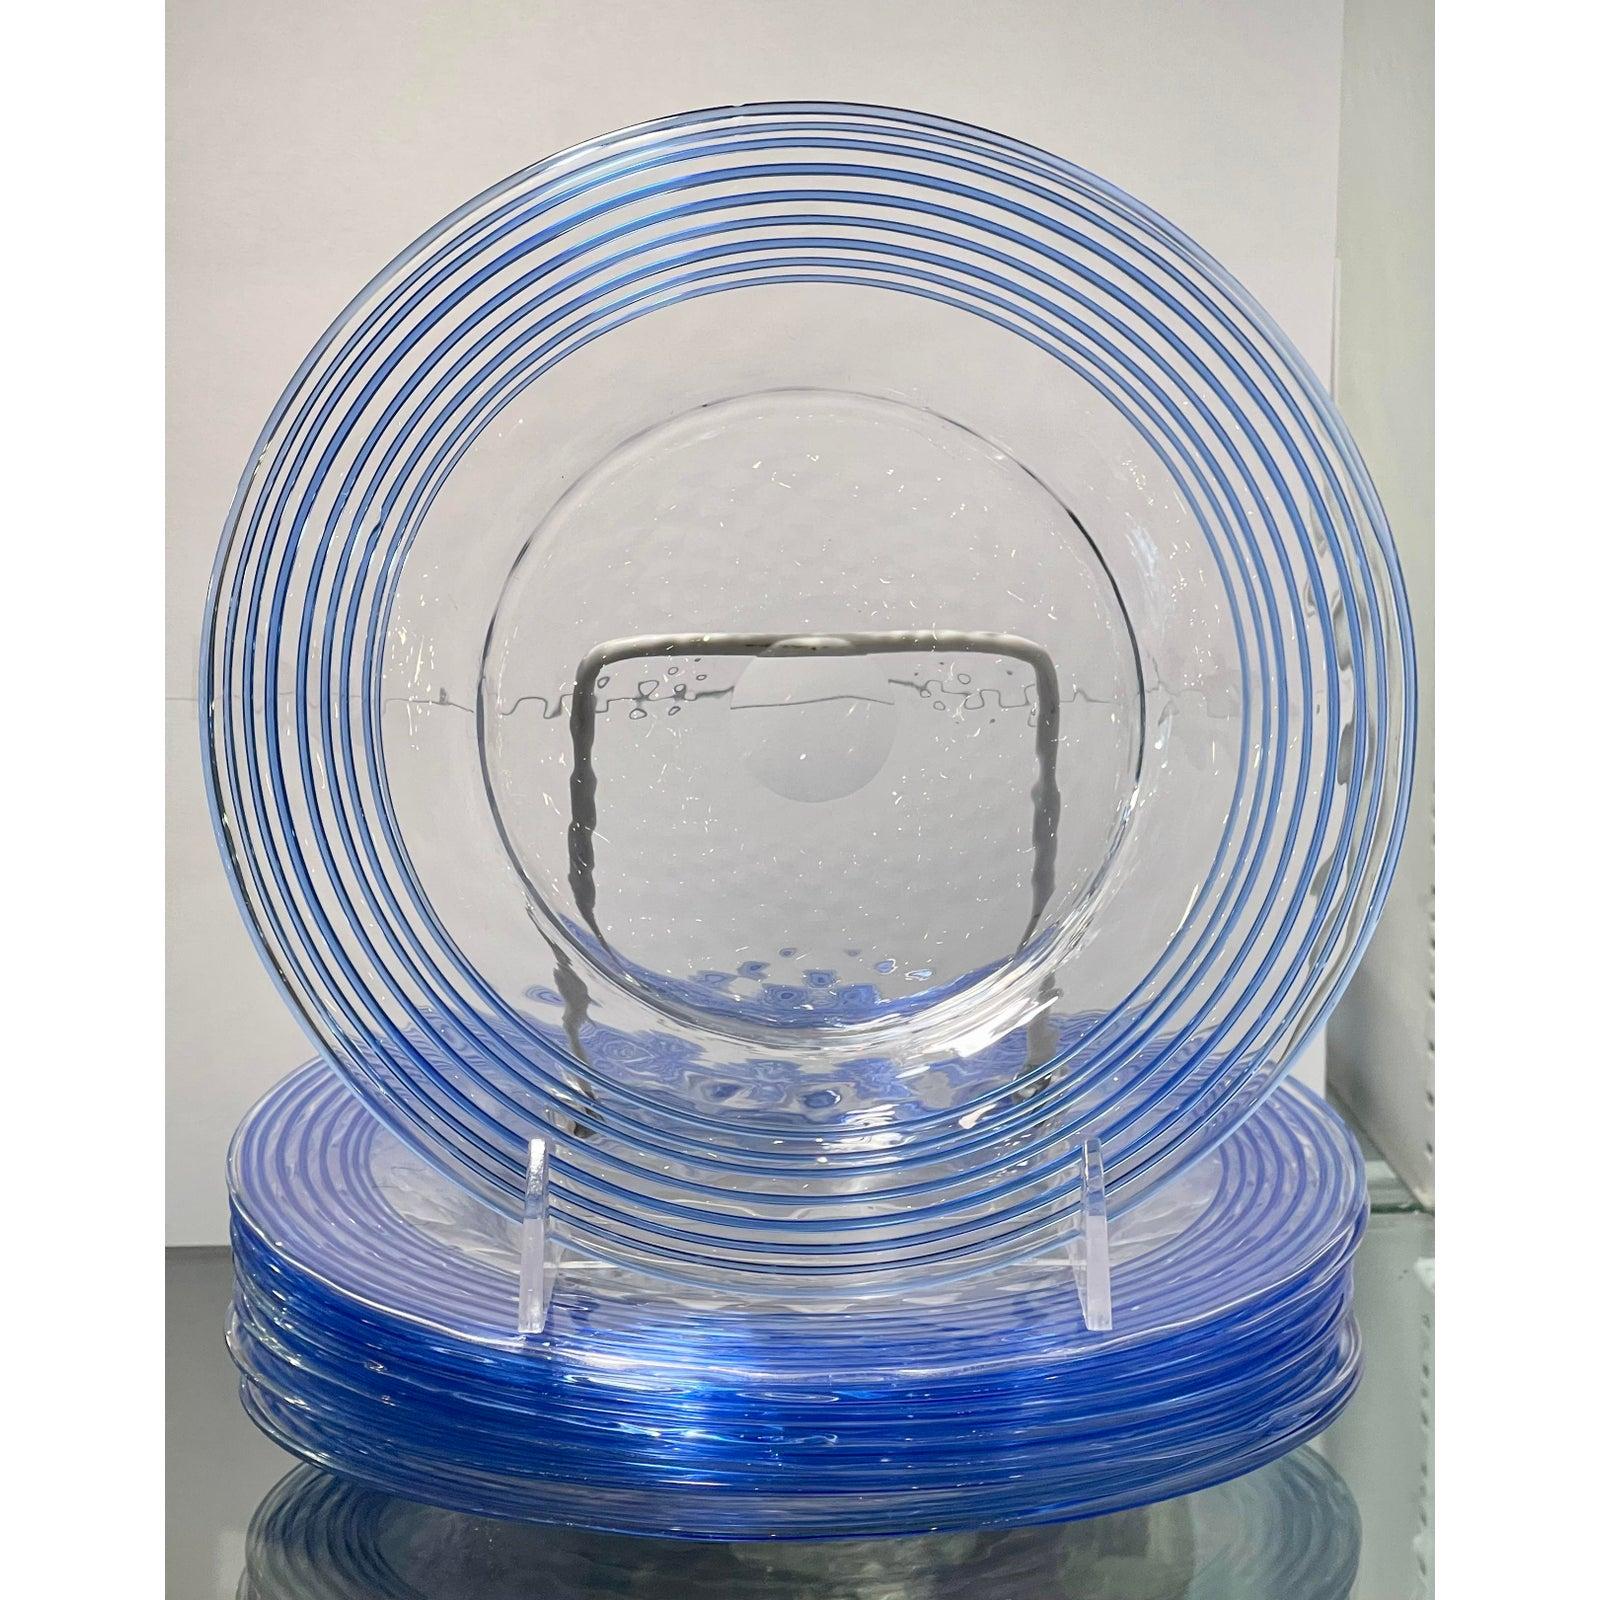 Art Deco Frederick Carder for steuben blue threaded crystal plates - set of 8.

Additional information:
Materials: crystal.
Color: blue.
Brand: Steuben.
Period: 1920s.
Styles: Art Deco.
Item Type: vintage, aAntique or pre-owned.
Dimensions: